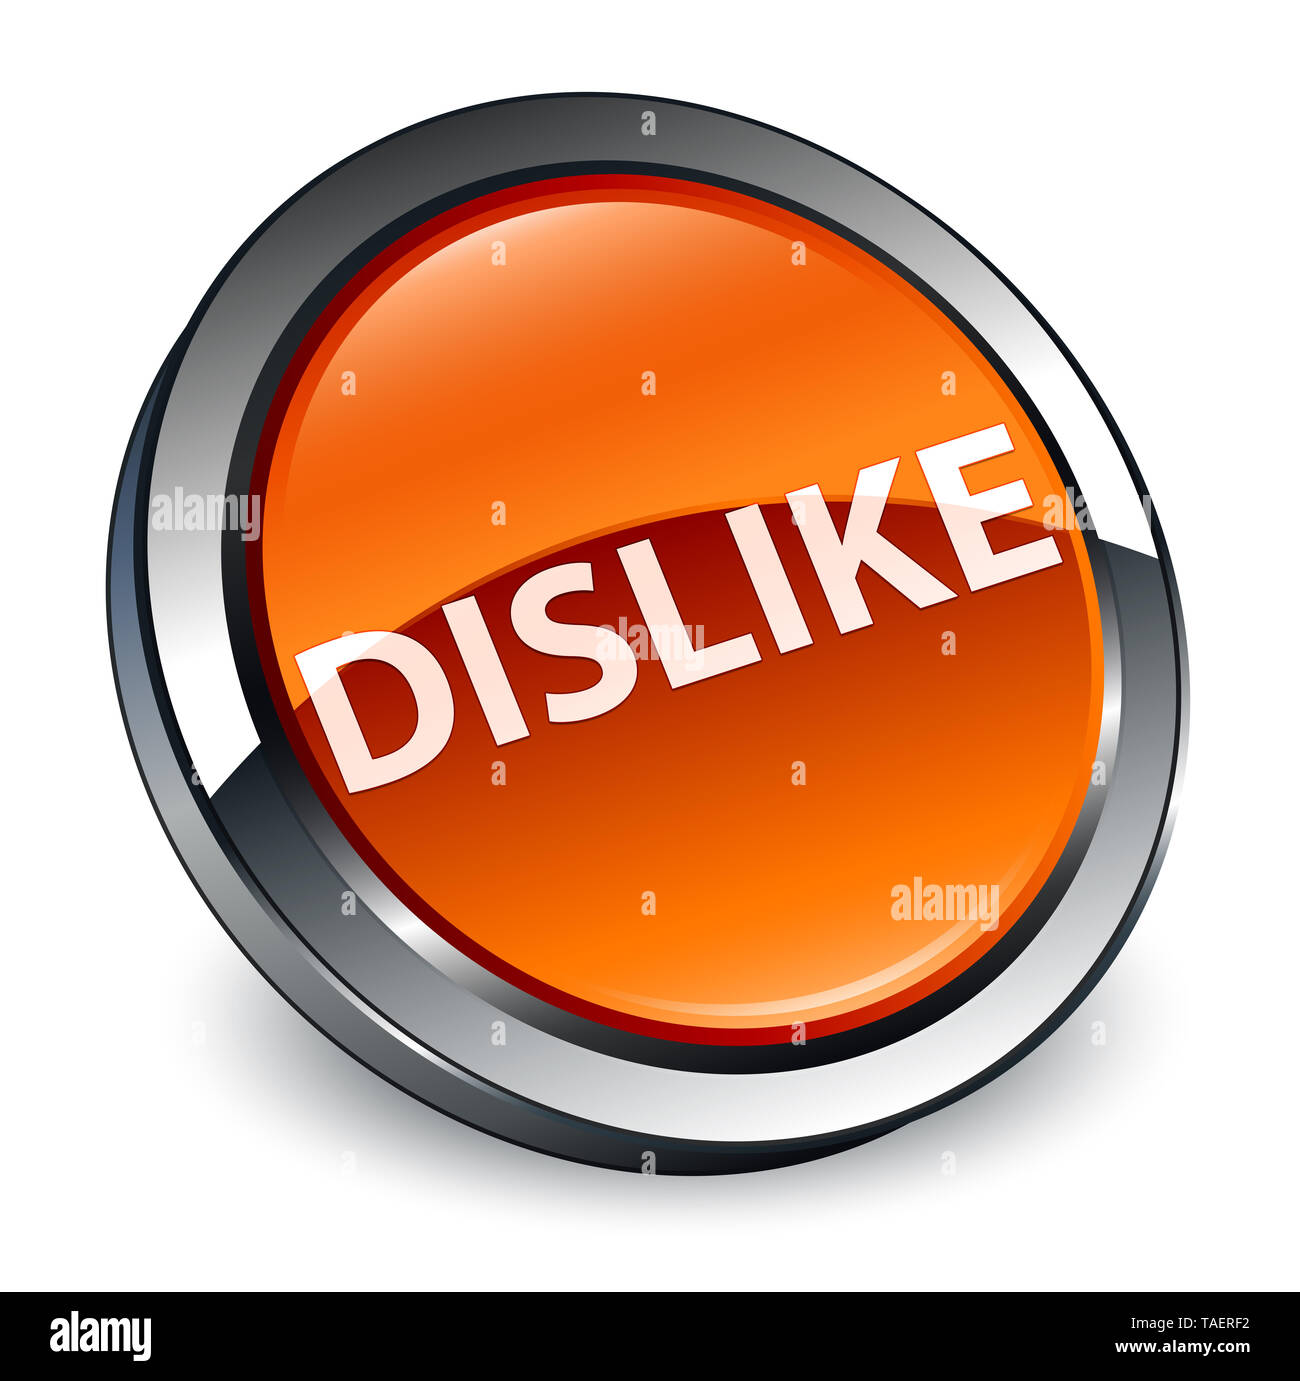 Dislike isolated on 3d brown round button abstract illustration Stock Photo